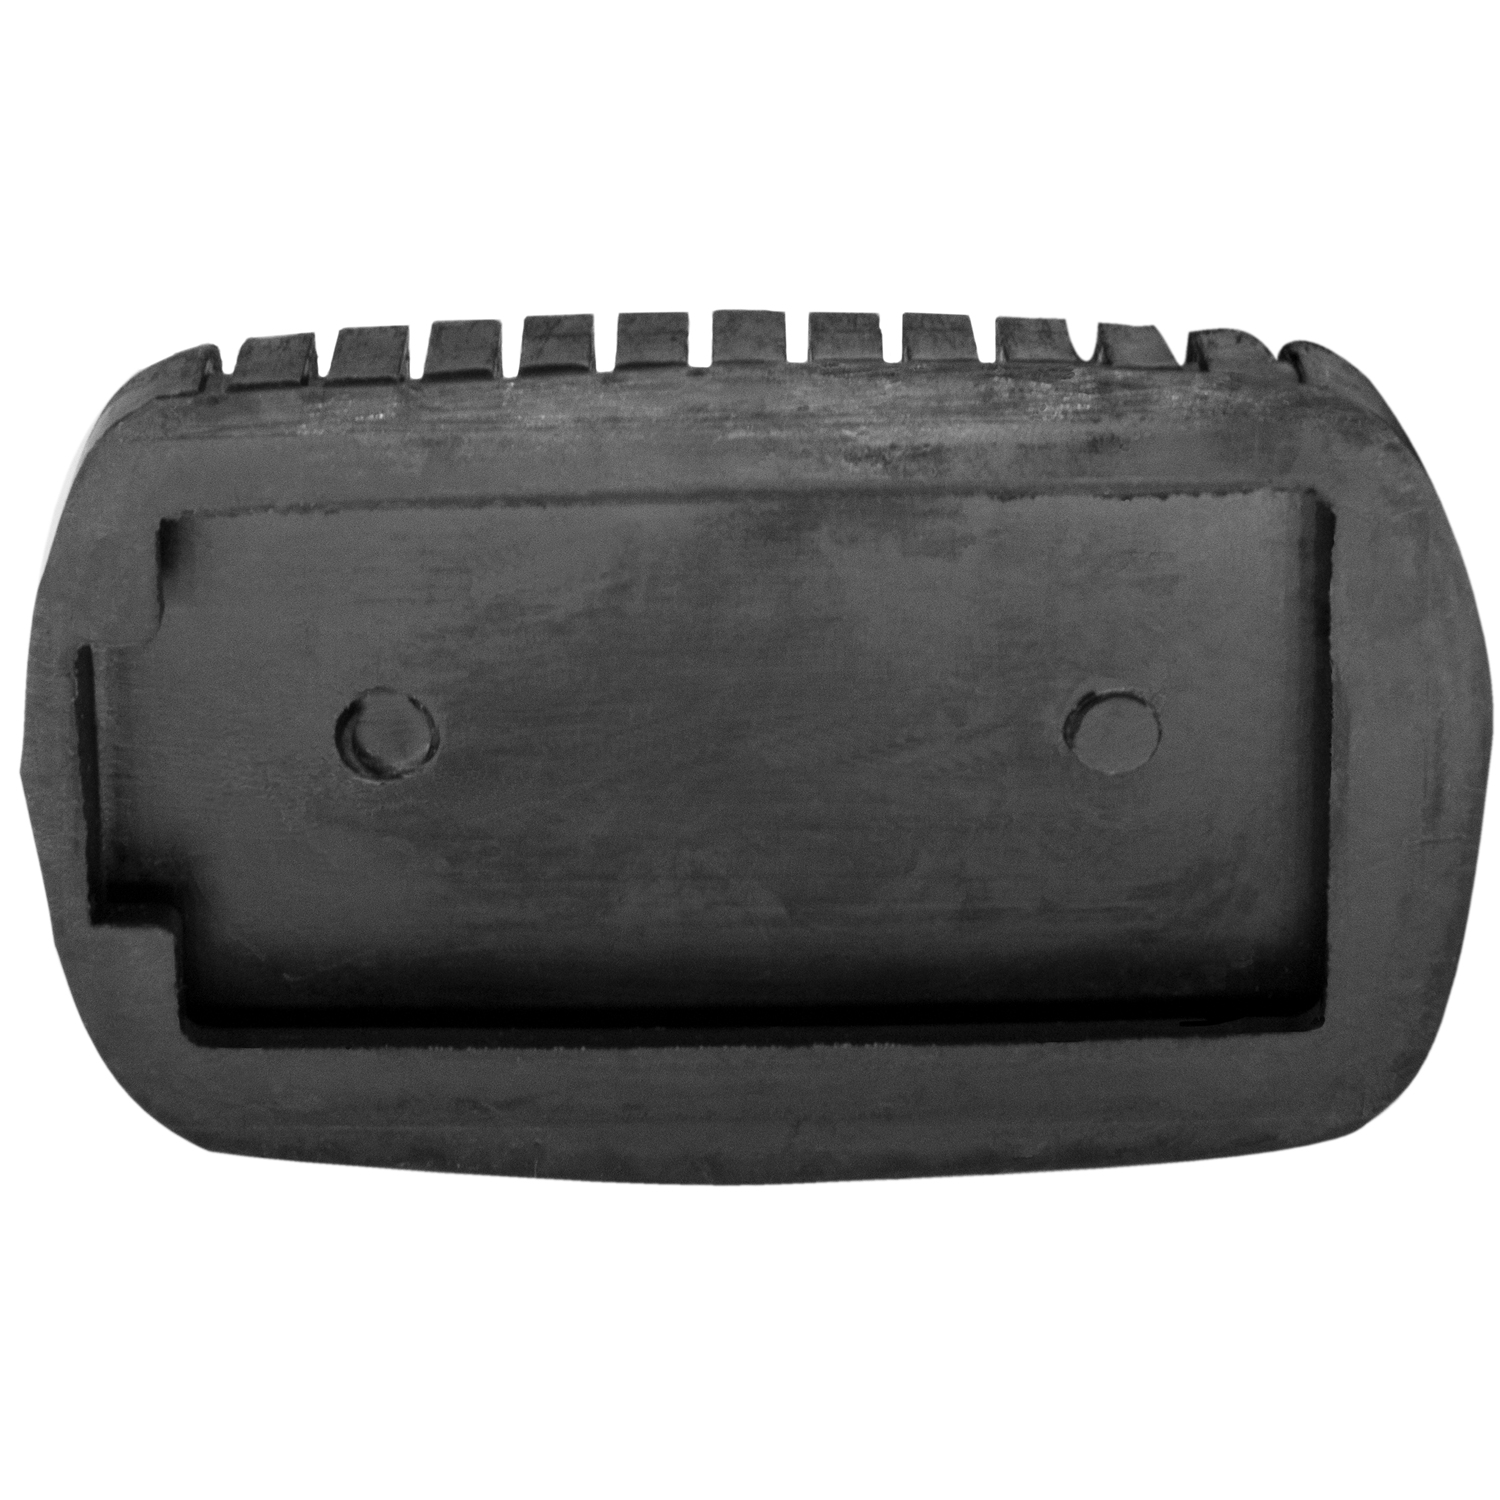 1961 GMC 1500 Series Clutch and Brake Pedal Pad.  2-1/2 wide X 3-7/8 long-CB 100-A/EA